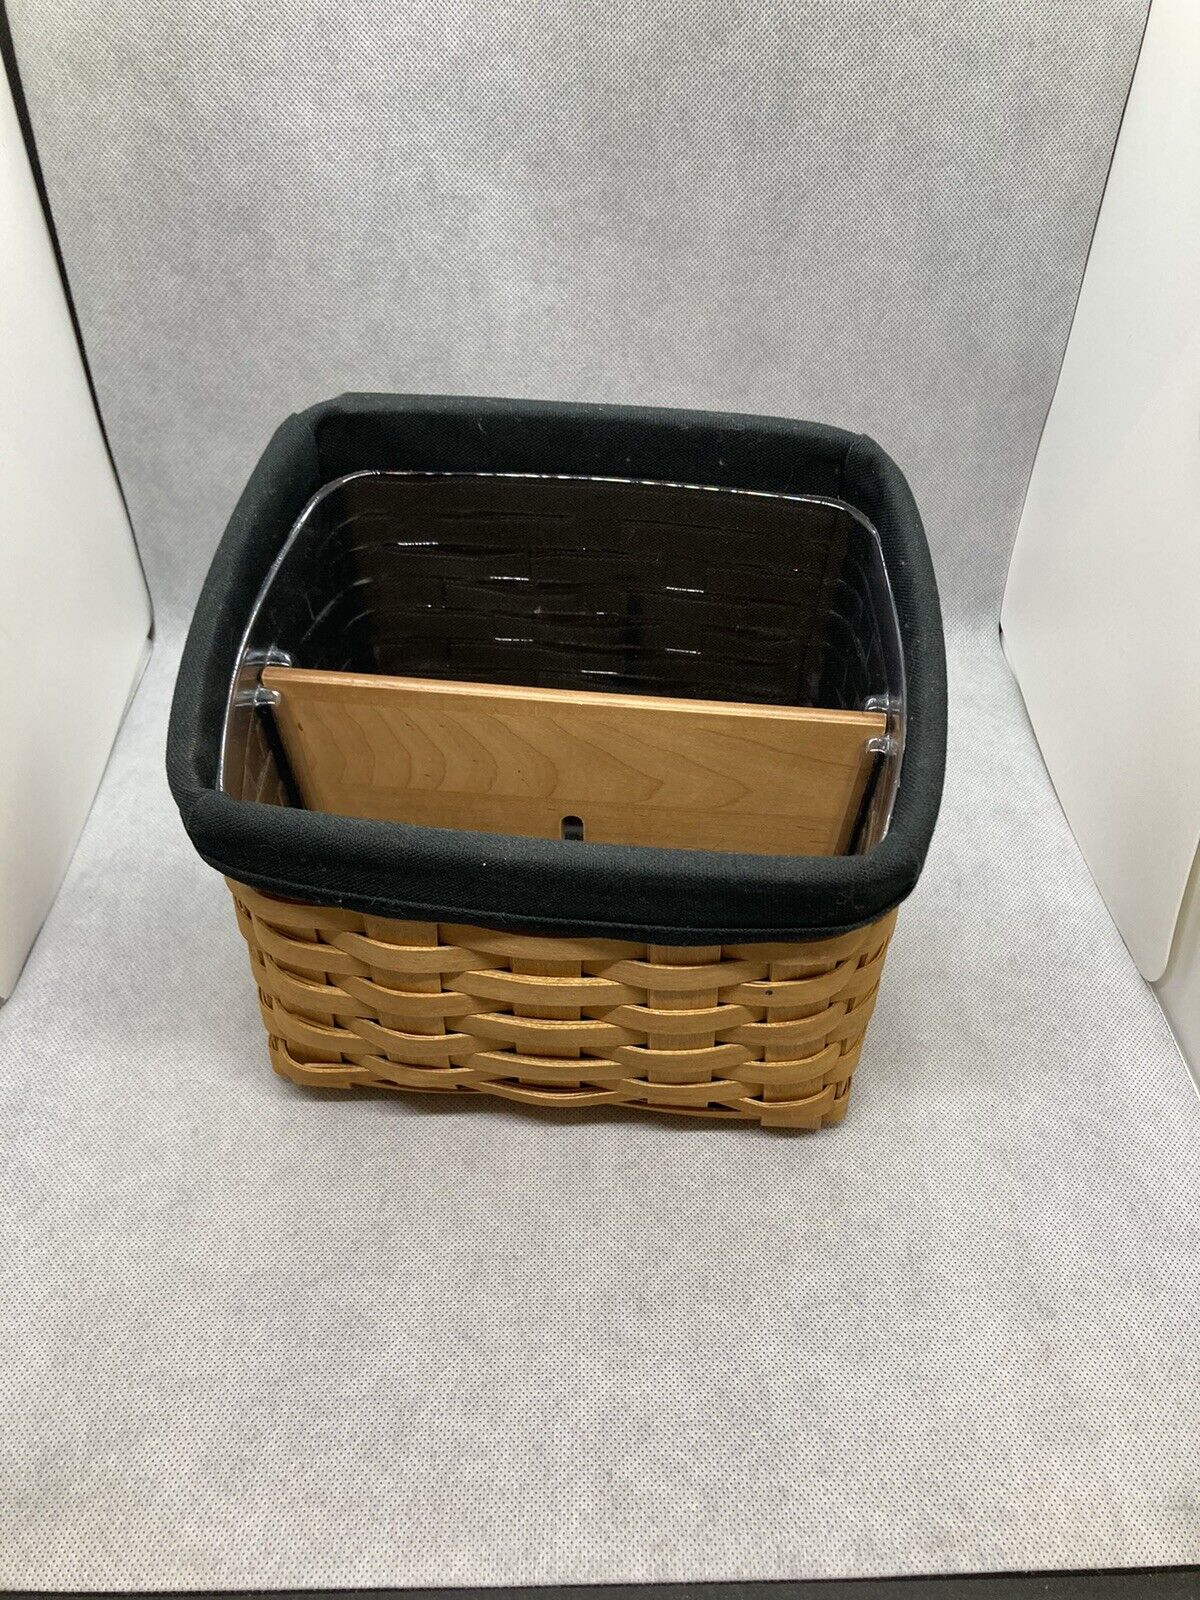 Longaberger 2006 TV Time Basket w/ Divider, Green Fabric and Protector liner